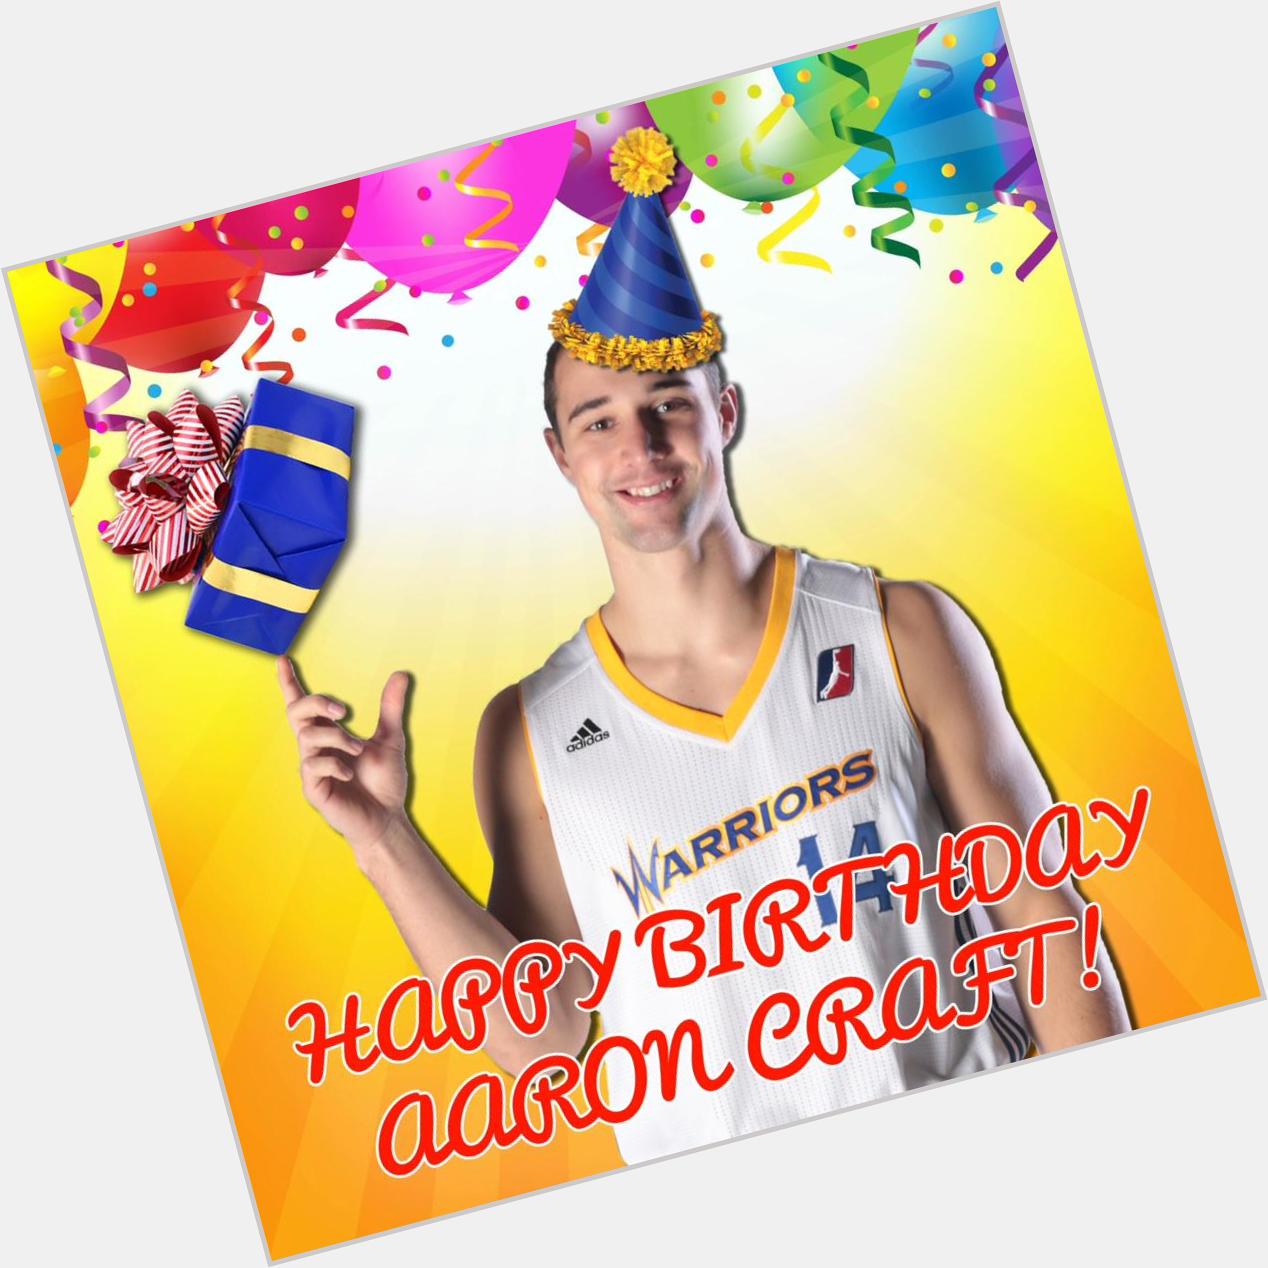   Join us in wishing a happy birthday to Aaron craft a future warrior 